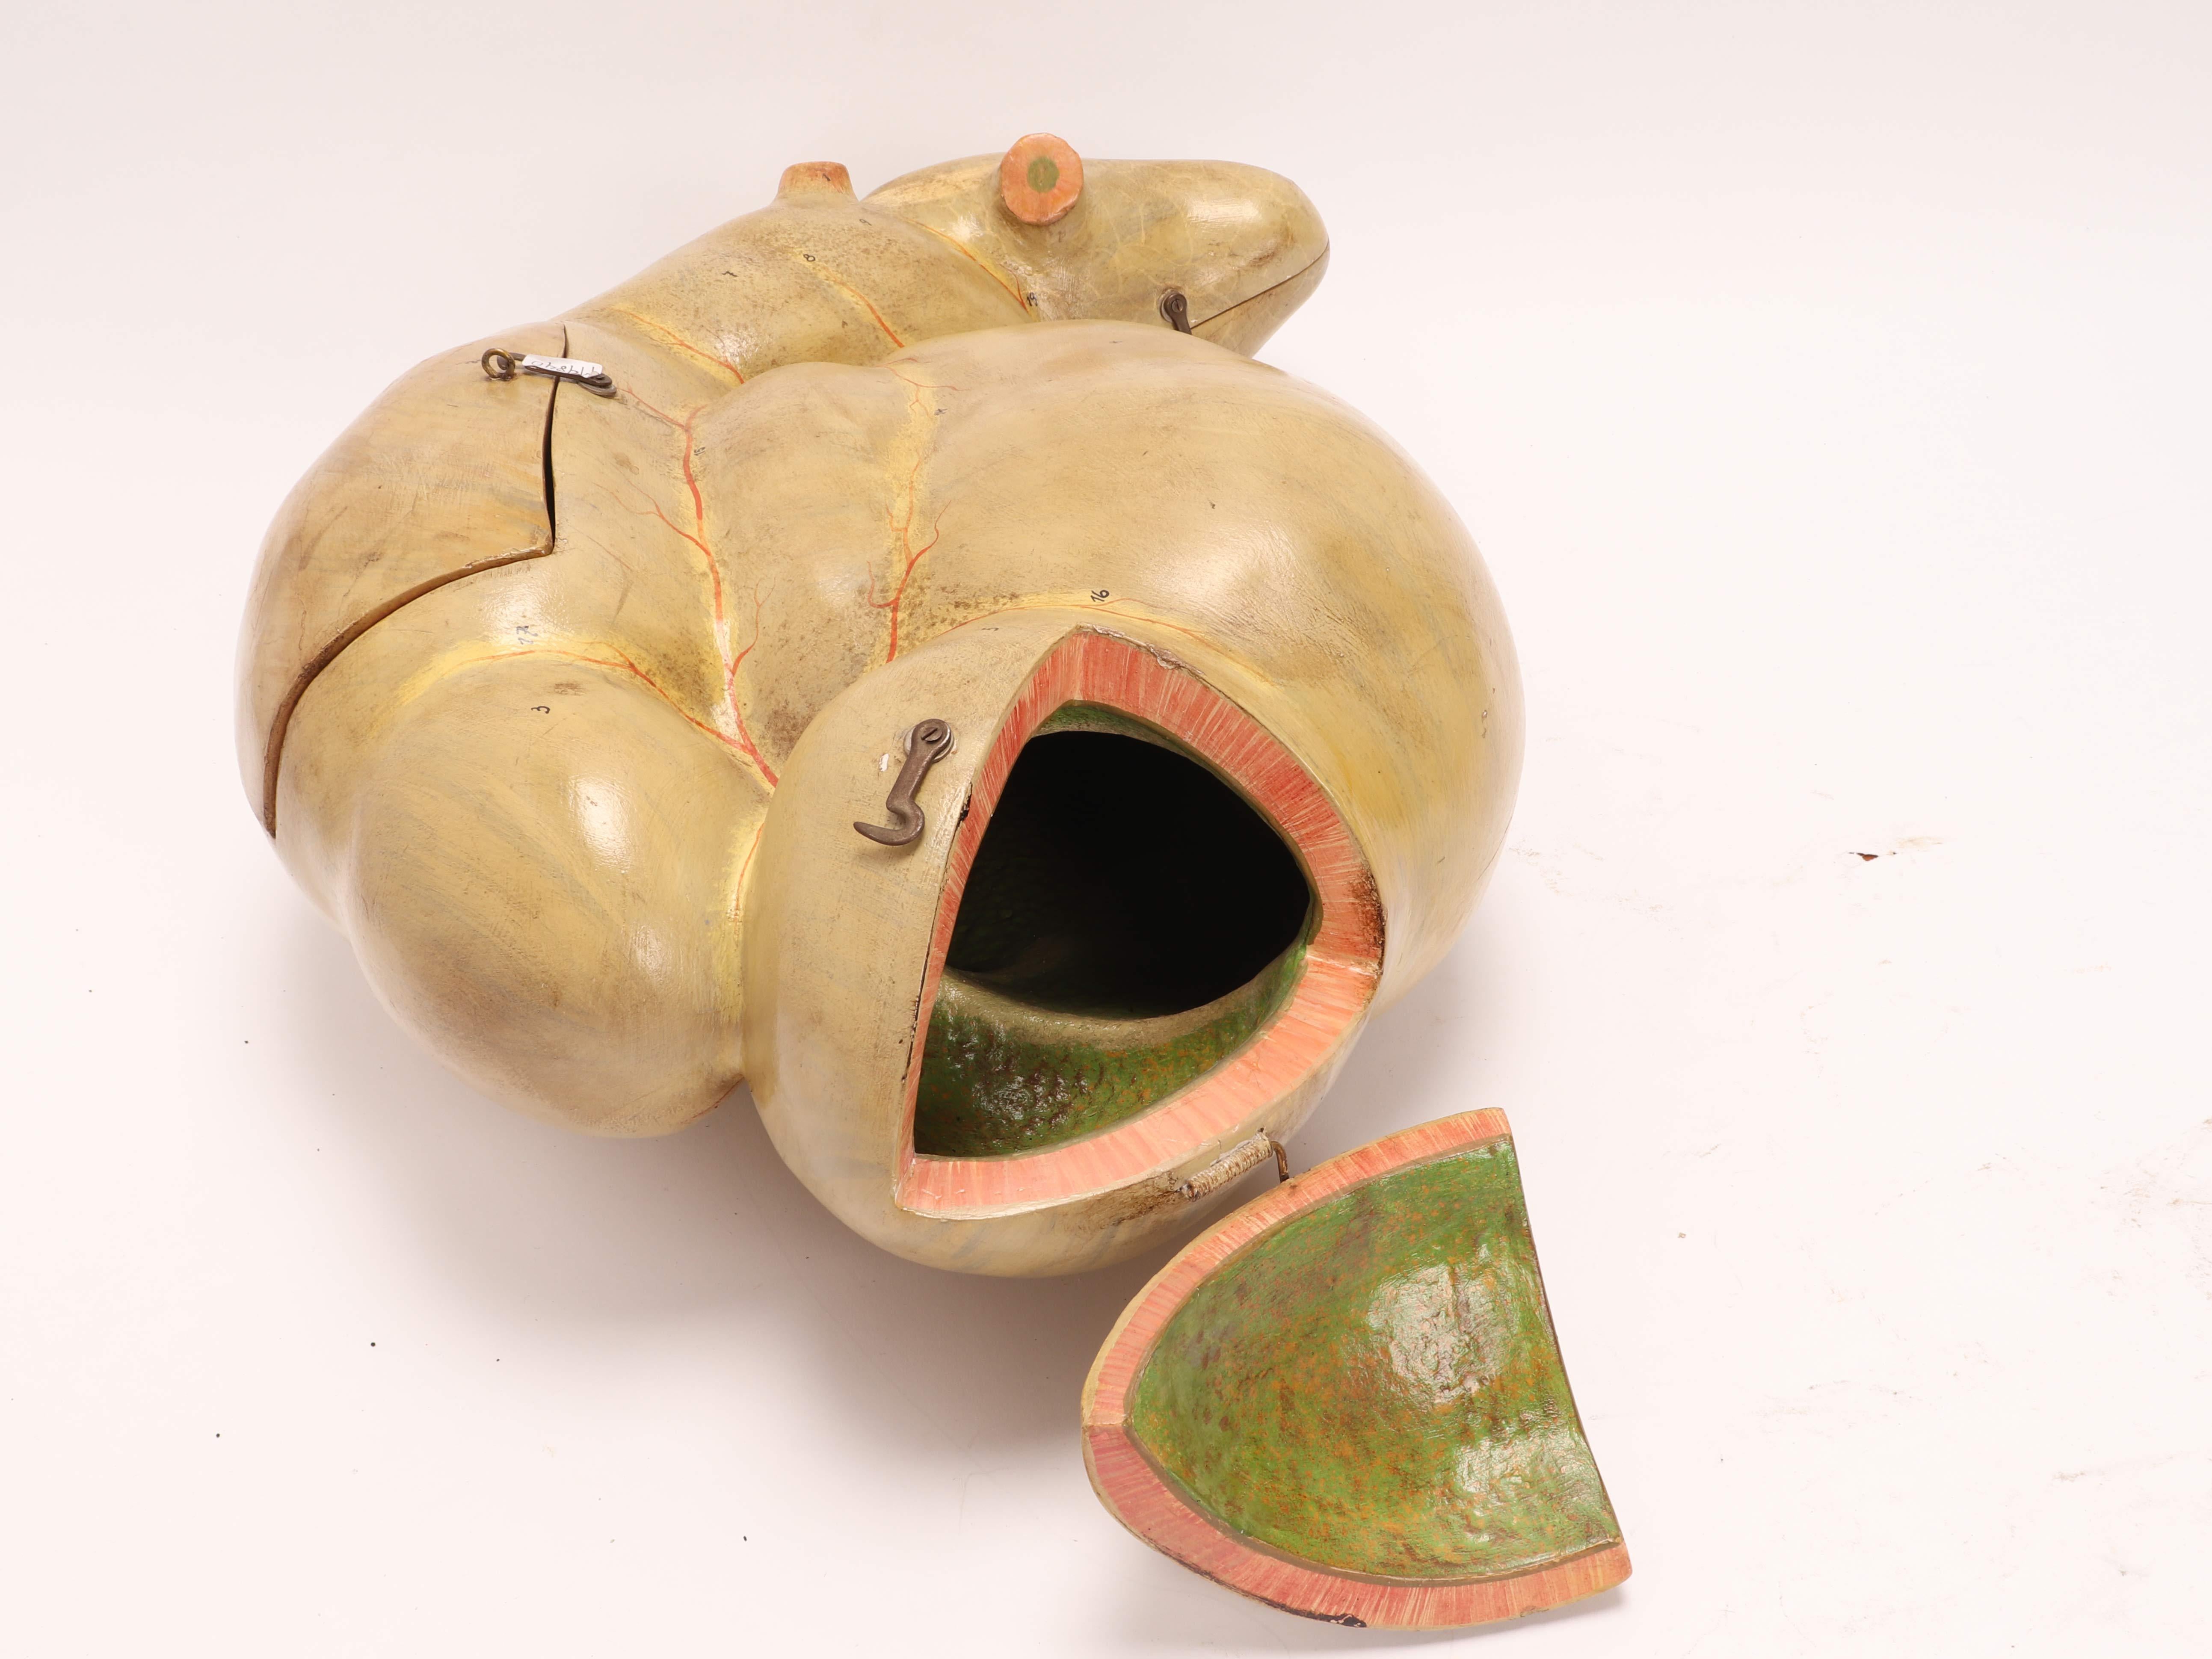 Italian Anatomical Model Depicting an Intestine, Italy 1890 For Sale